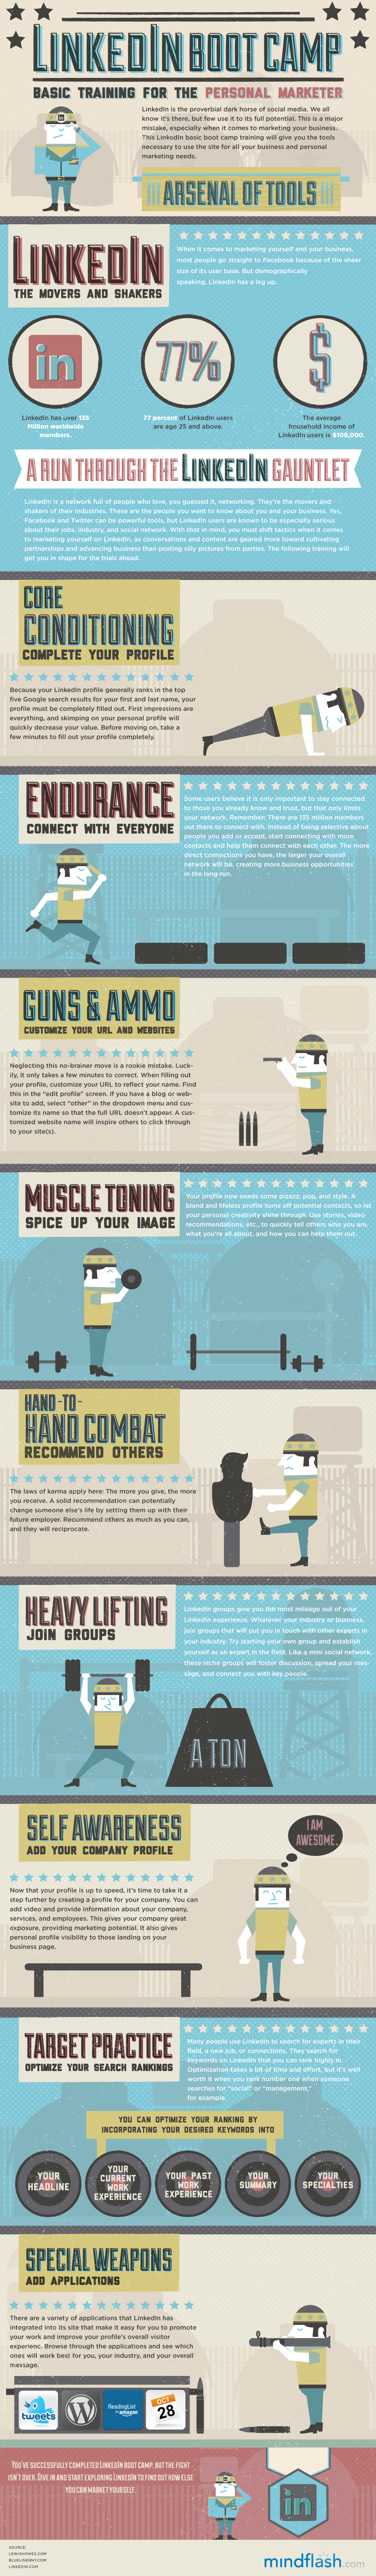 LinkedIn Bootcamp: Basic Training for the Personal Marketer (Infographic)